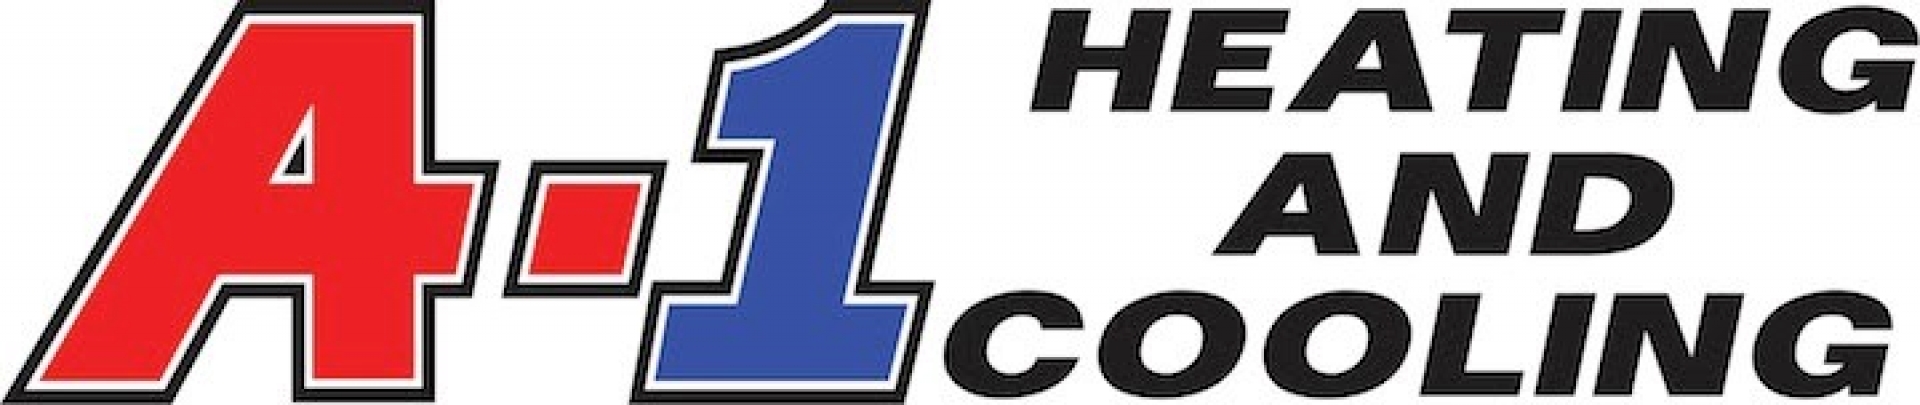 A-1 Heating and Cooling Logo